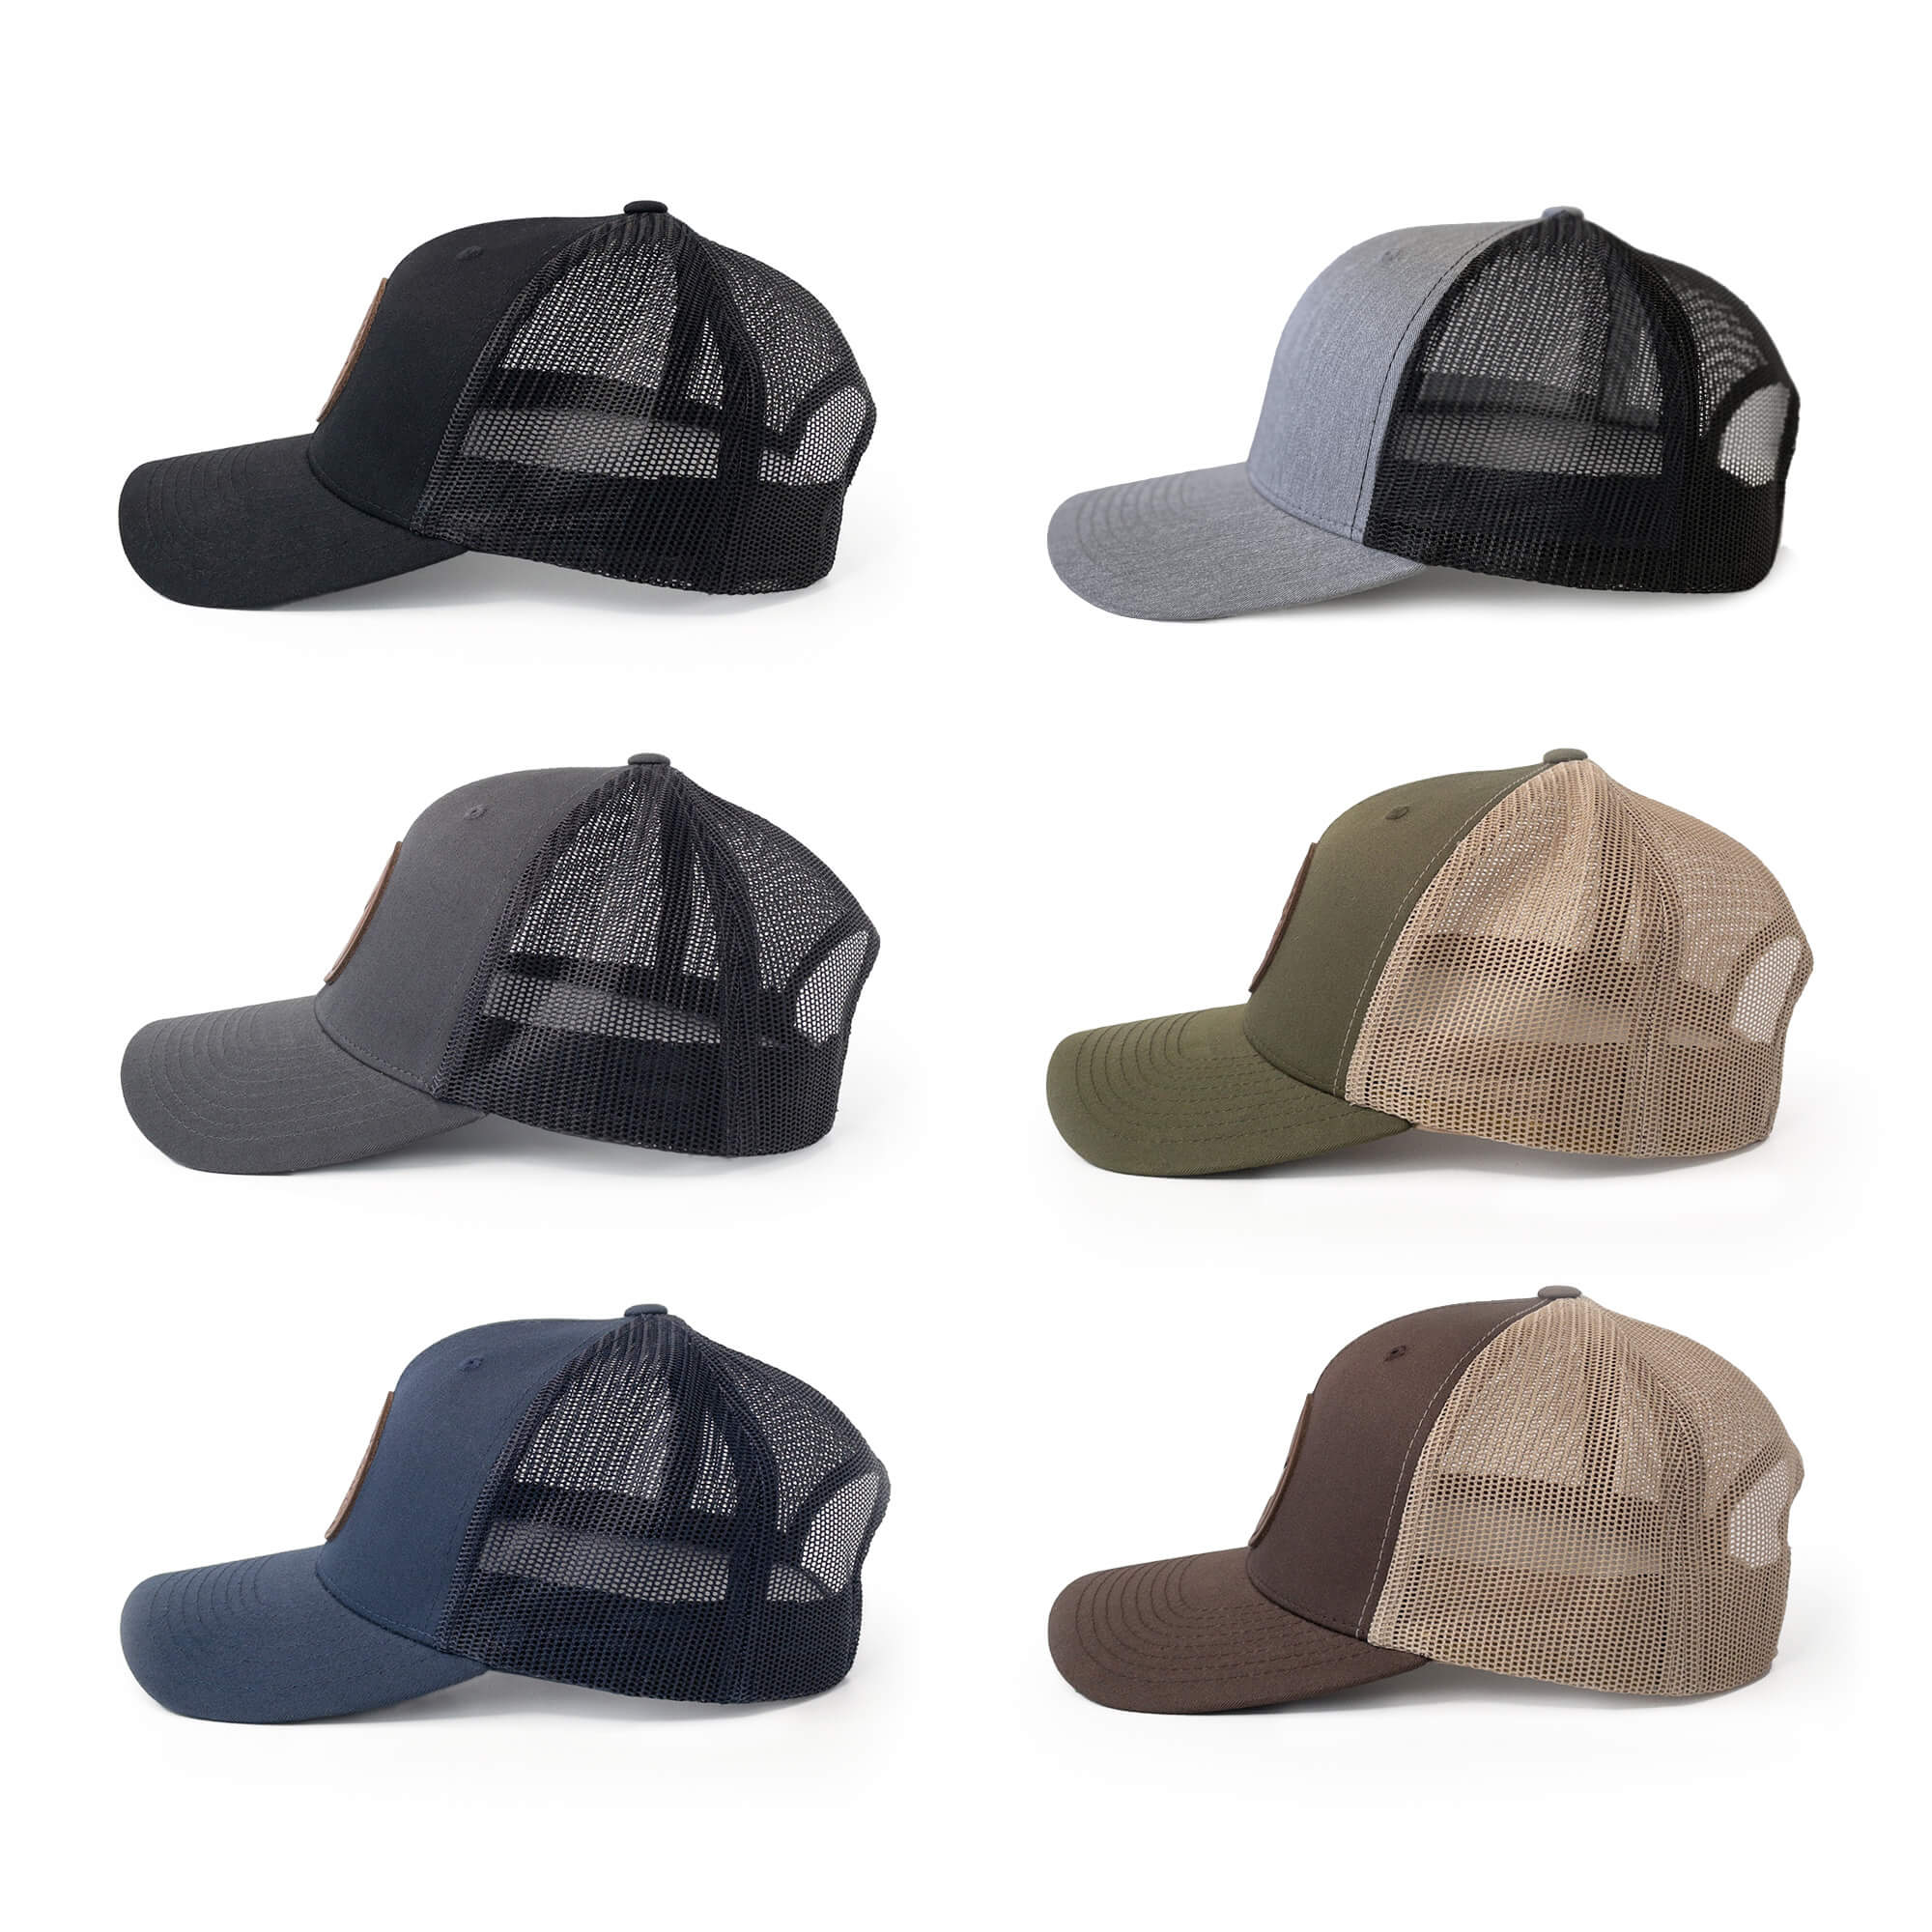 Leather patch trucker hats available in 6 colors | BLACK-002-004, CHARC-002-004, NAVY-002-004, HGREY-002-004, MOSS-002-004, BROWN-002-004